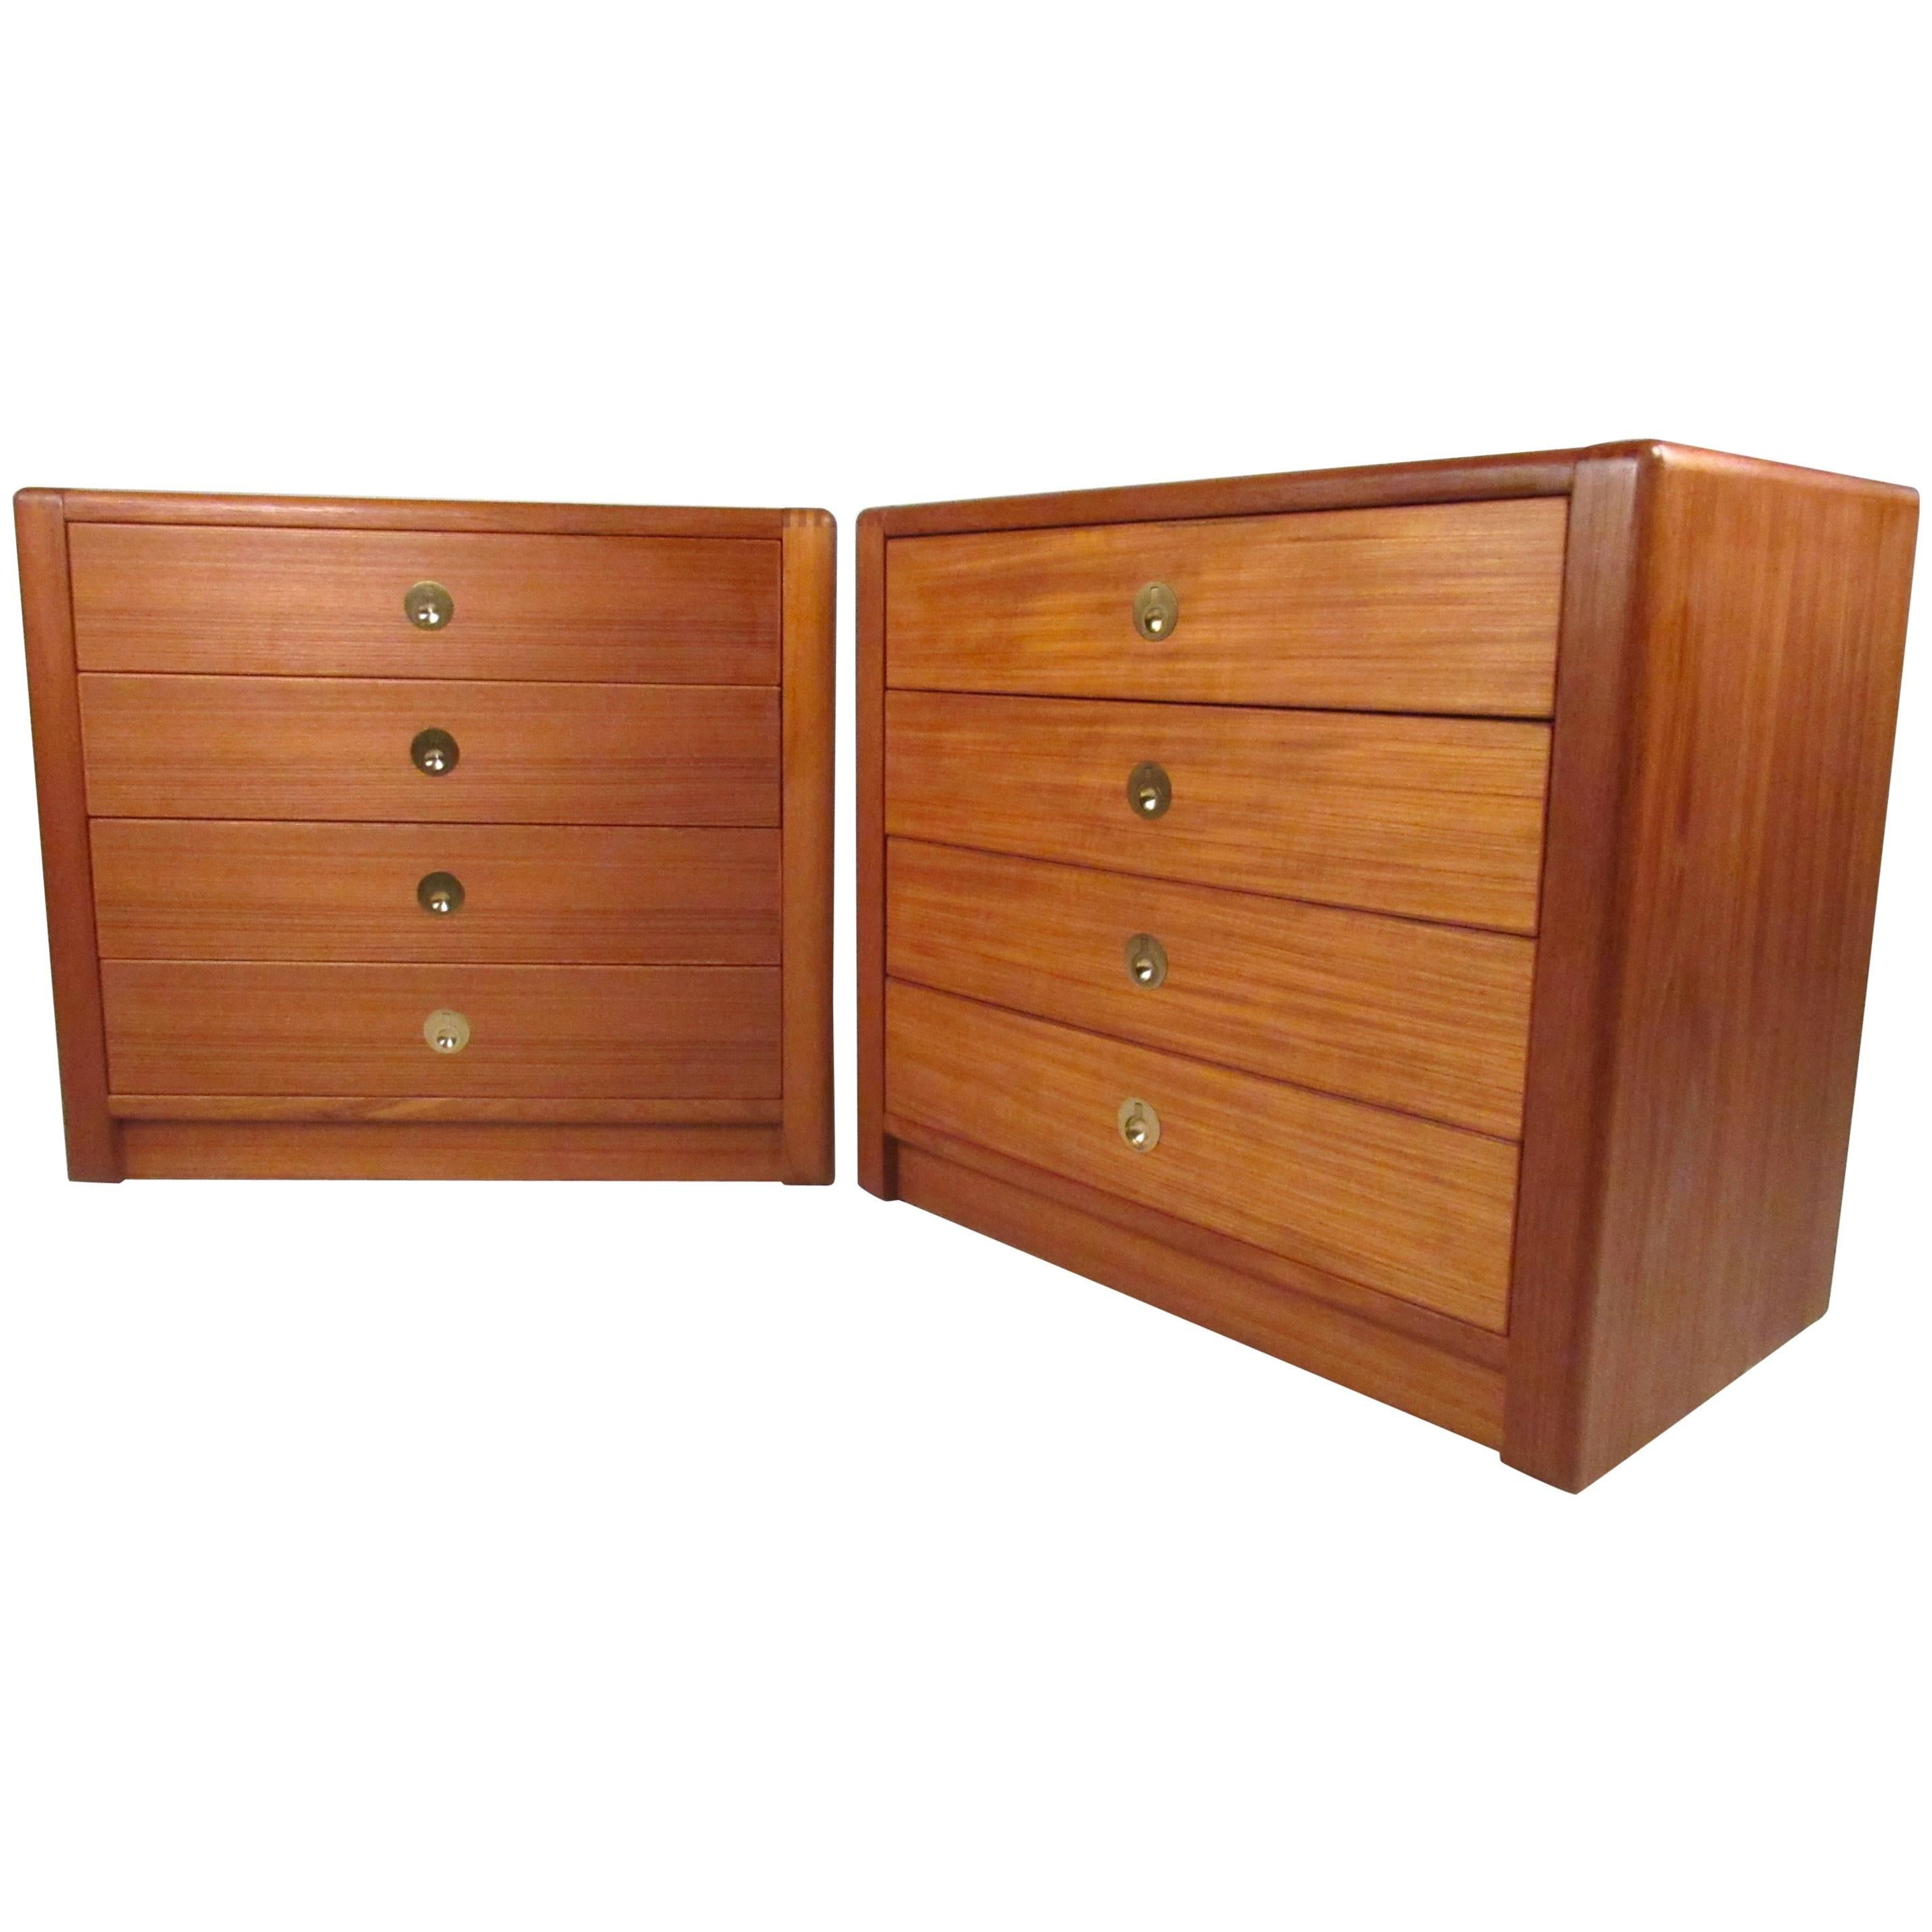 Pair of Contemporary Modern Teak Captain Style Dressers by D-Scan